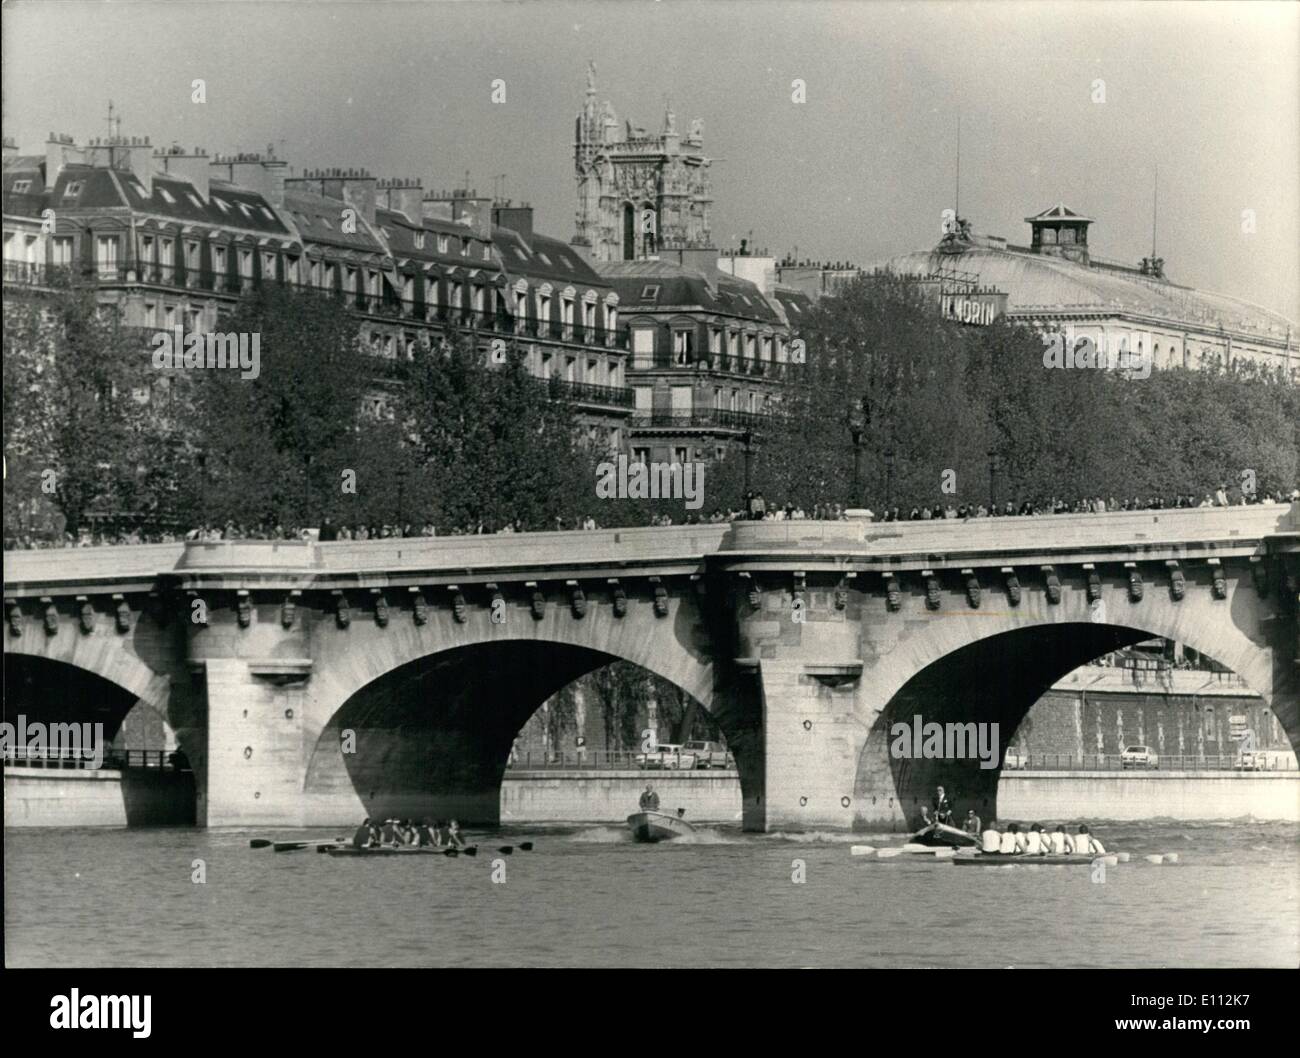 May 05, 1975 - The famous competition between Oxford & Cambridge occurred on the Seine today from Pont de Sully to Pont de la Concorde. This event was without precedent because since its creation in 1829, the two British teams have never competed against one another out Stock Photo